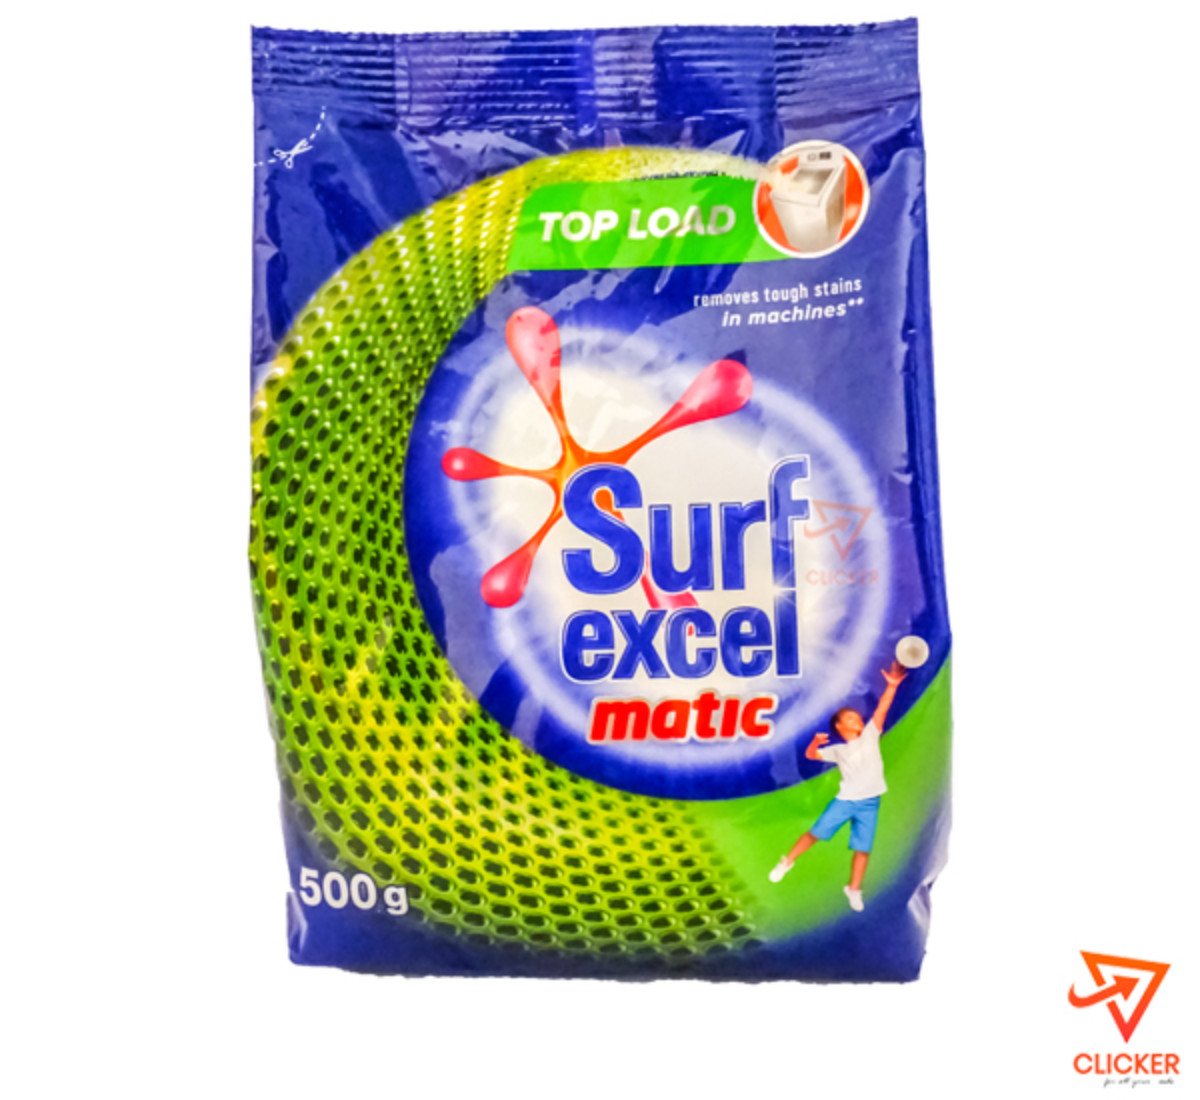 Clicker product 500g SURF EXCEL Matic Top Load 834